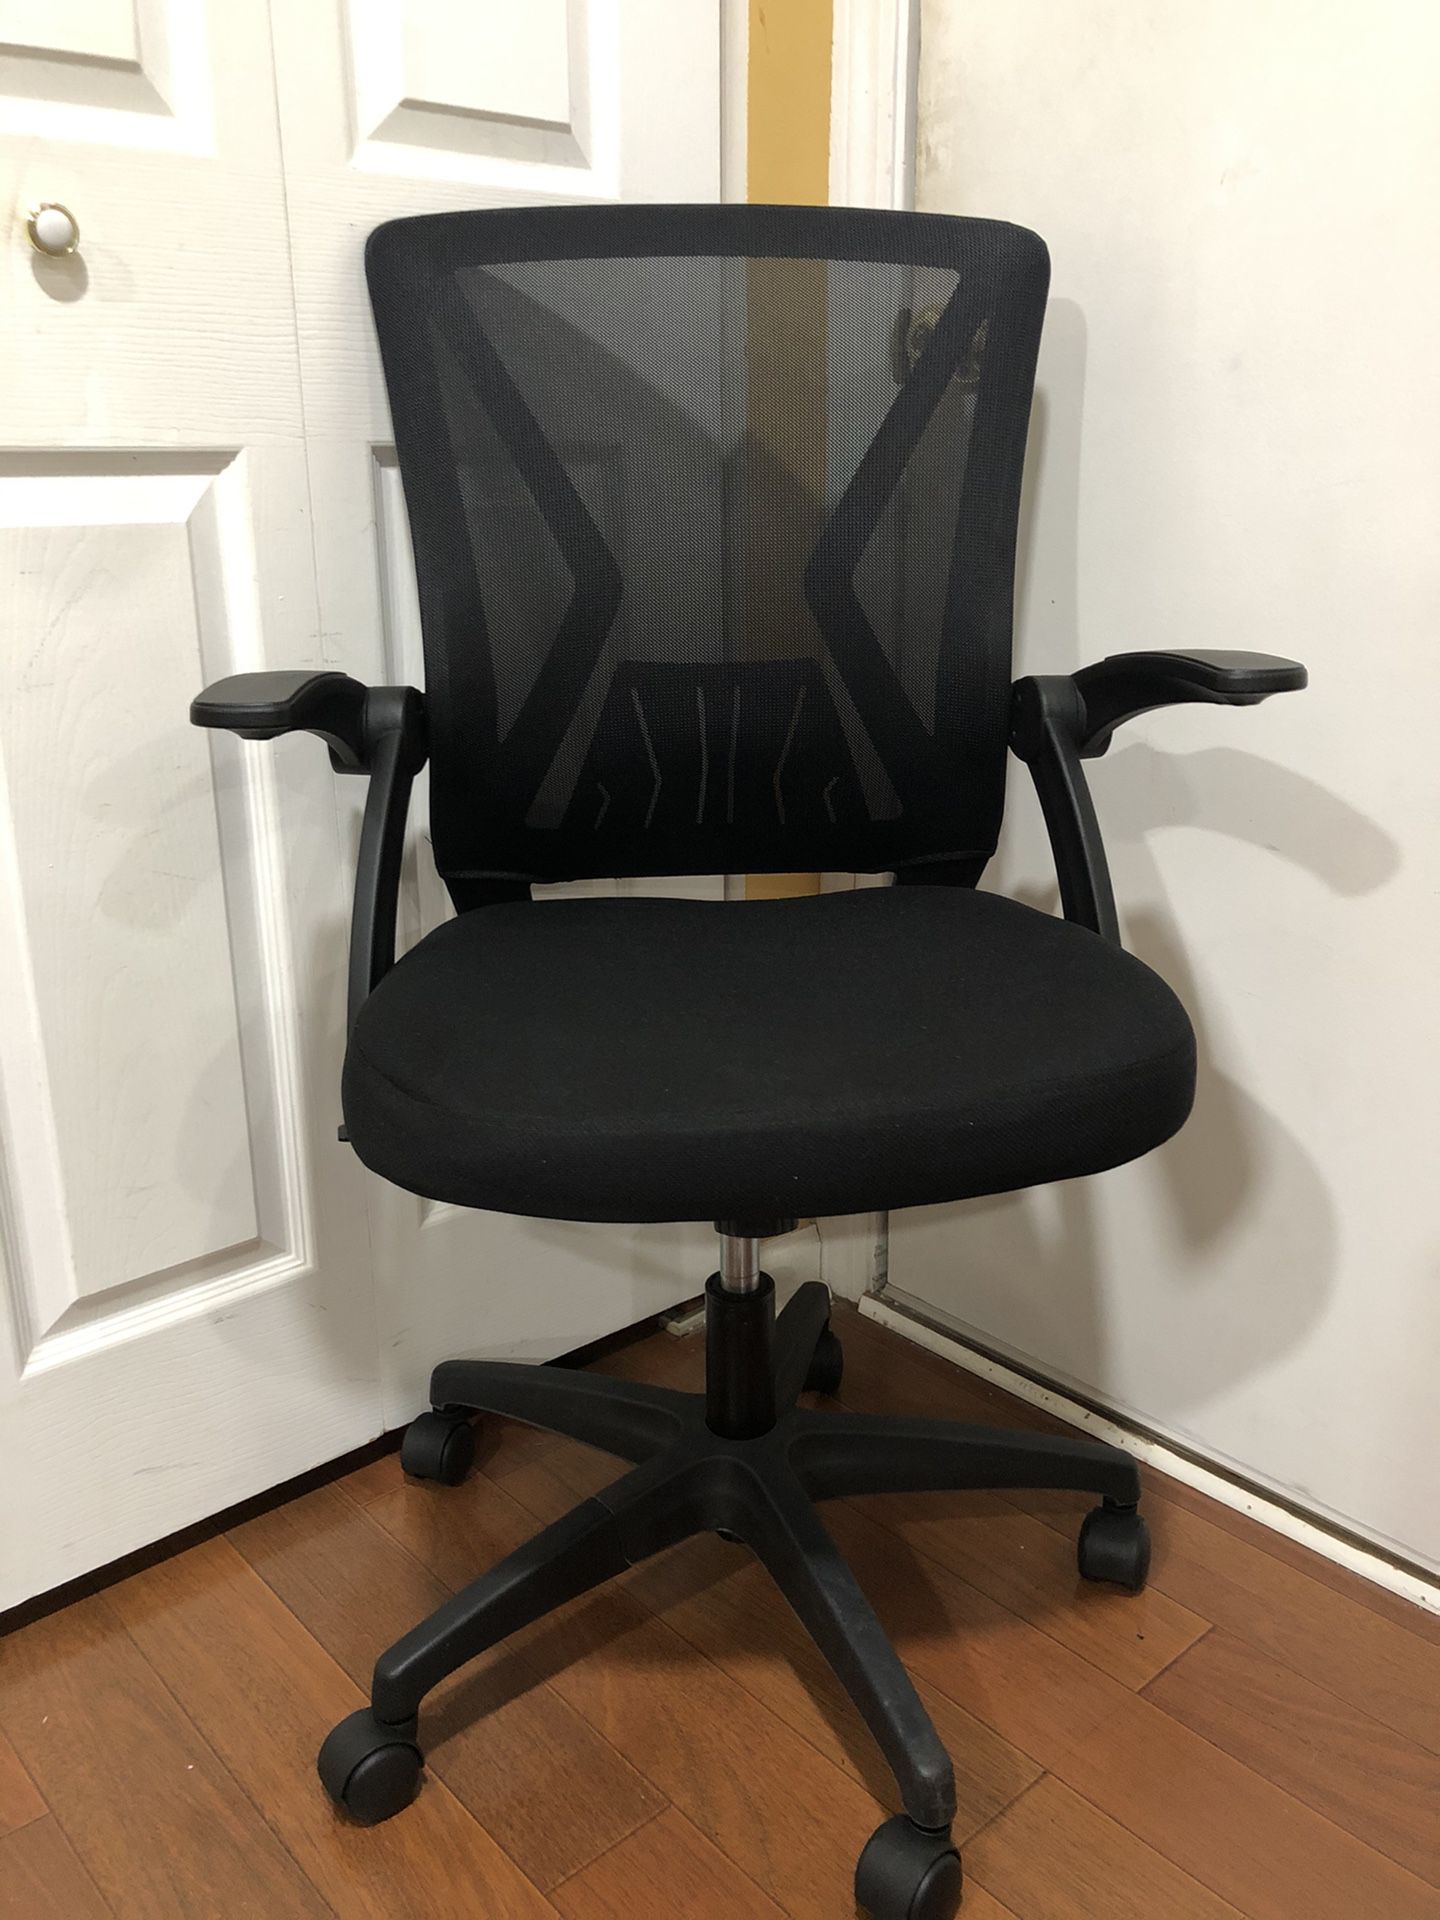 NEW- Black Mesh Desk Chair Flip Up Arms with Lumbar Support Computer Chair Adjustable Height Task Chairs